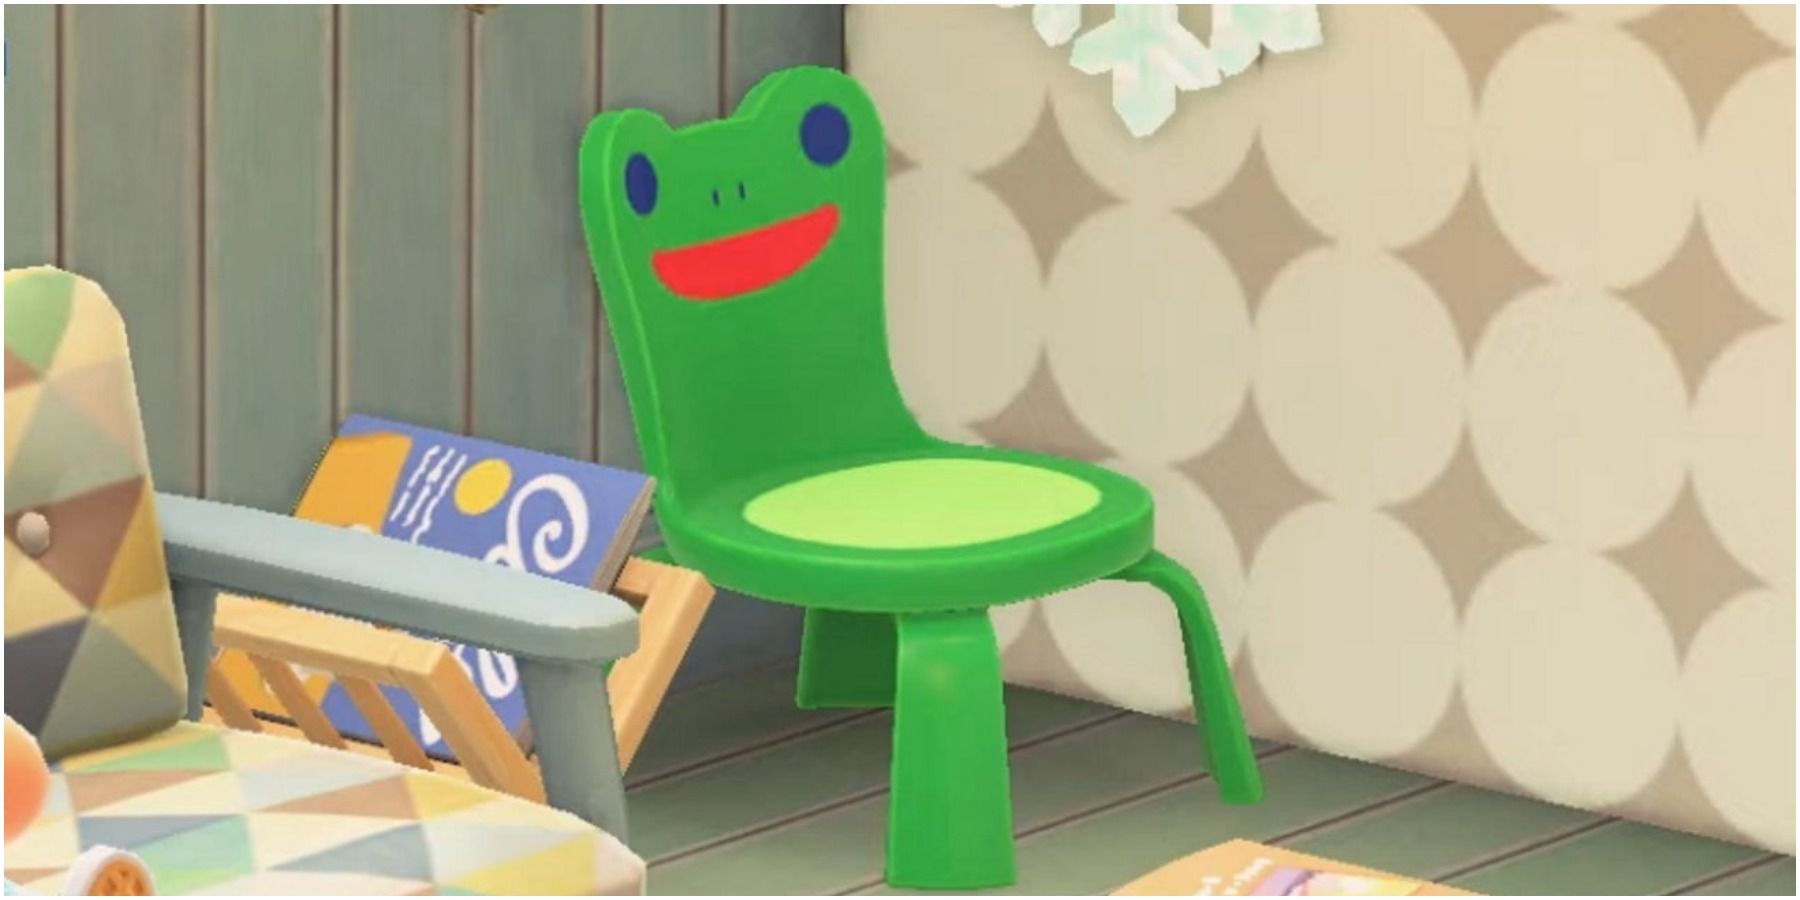 Froggy chair in room corner.